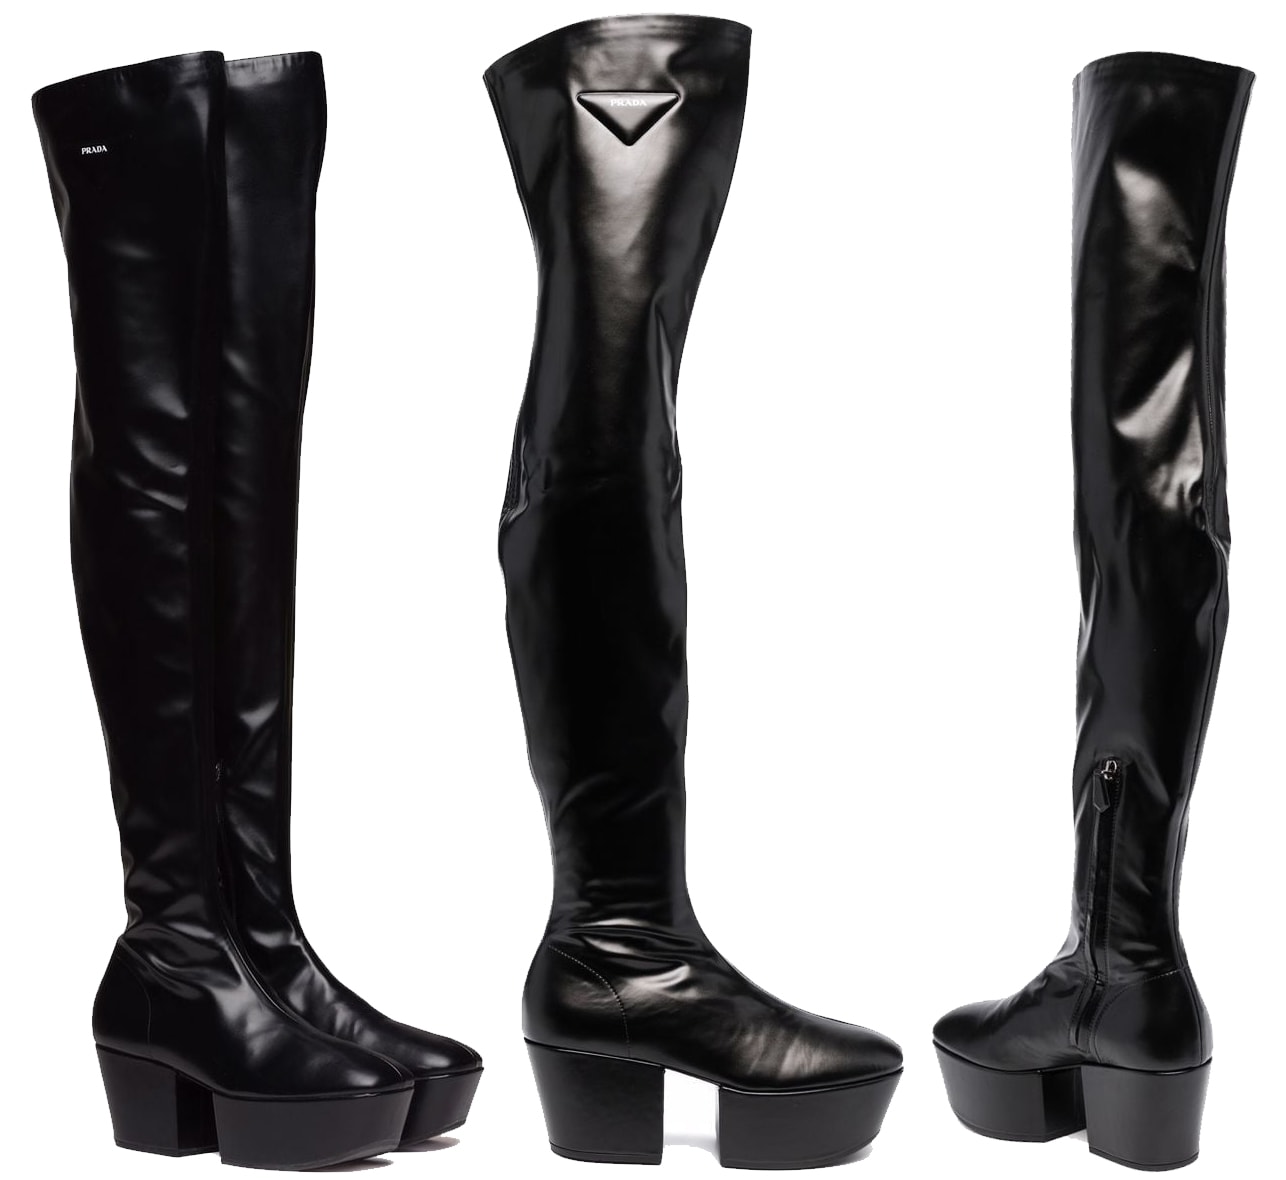 These Prada over-the-knee boots boast contemporary square toes with thick platforms and heels